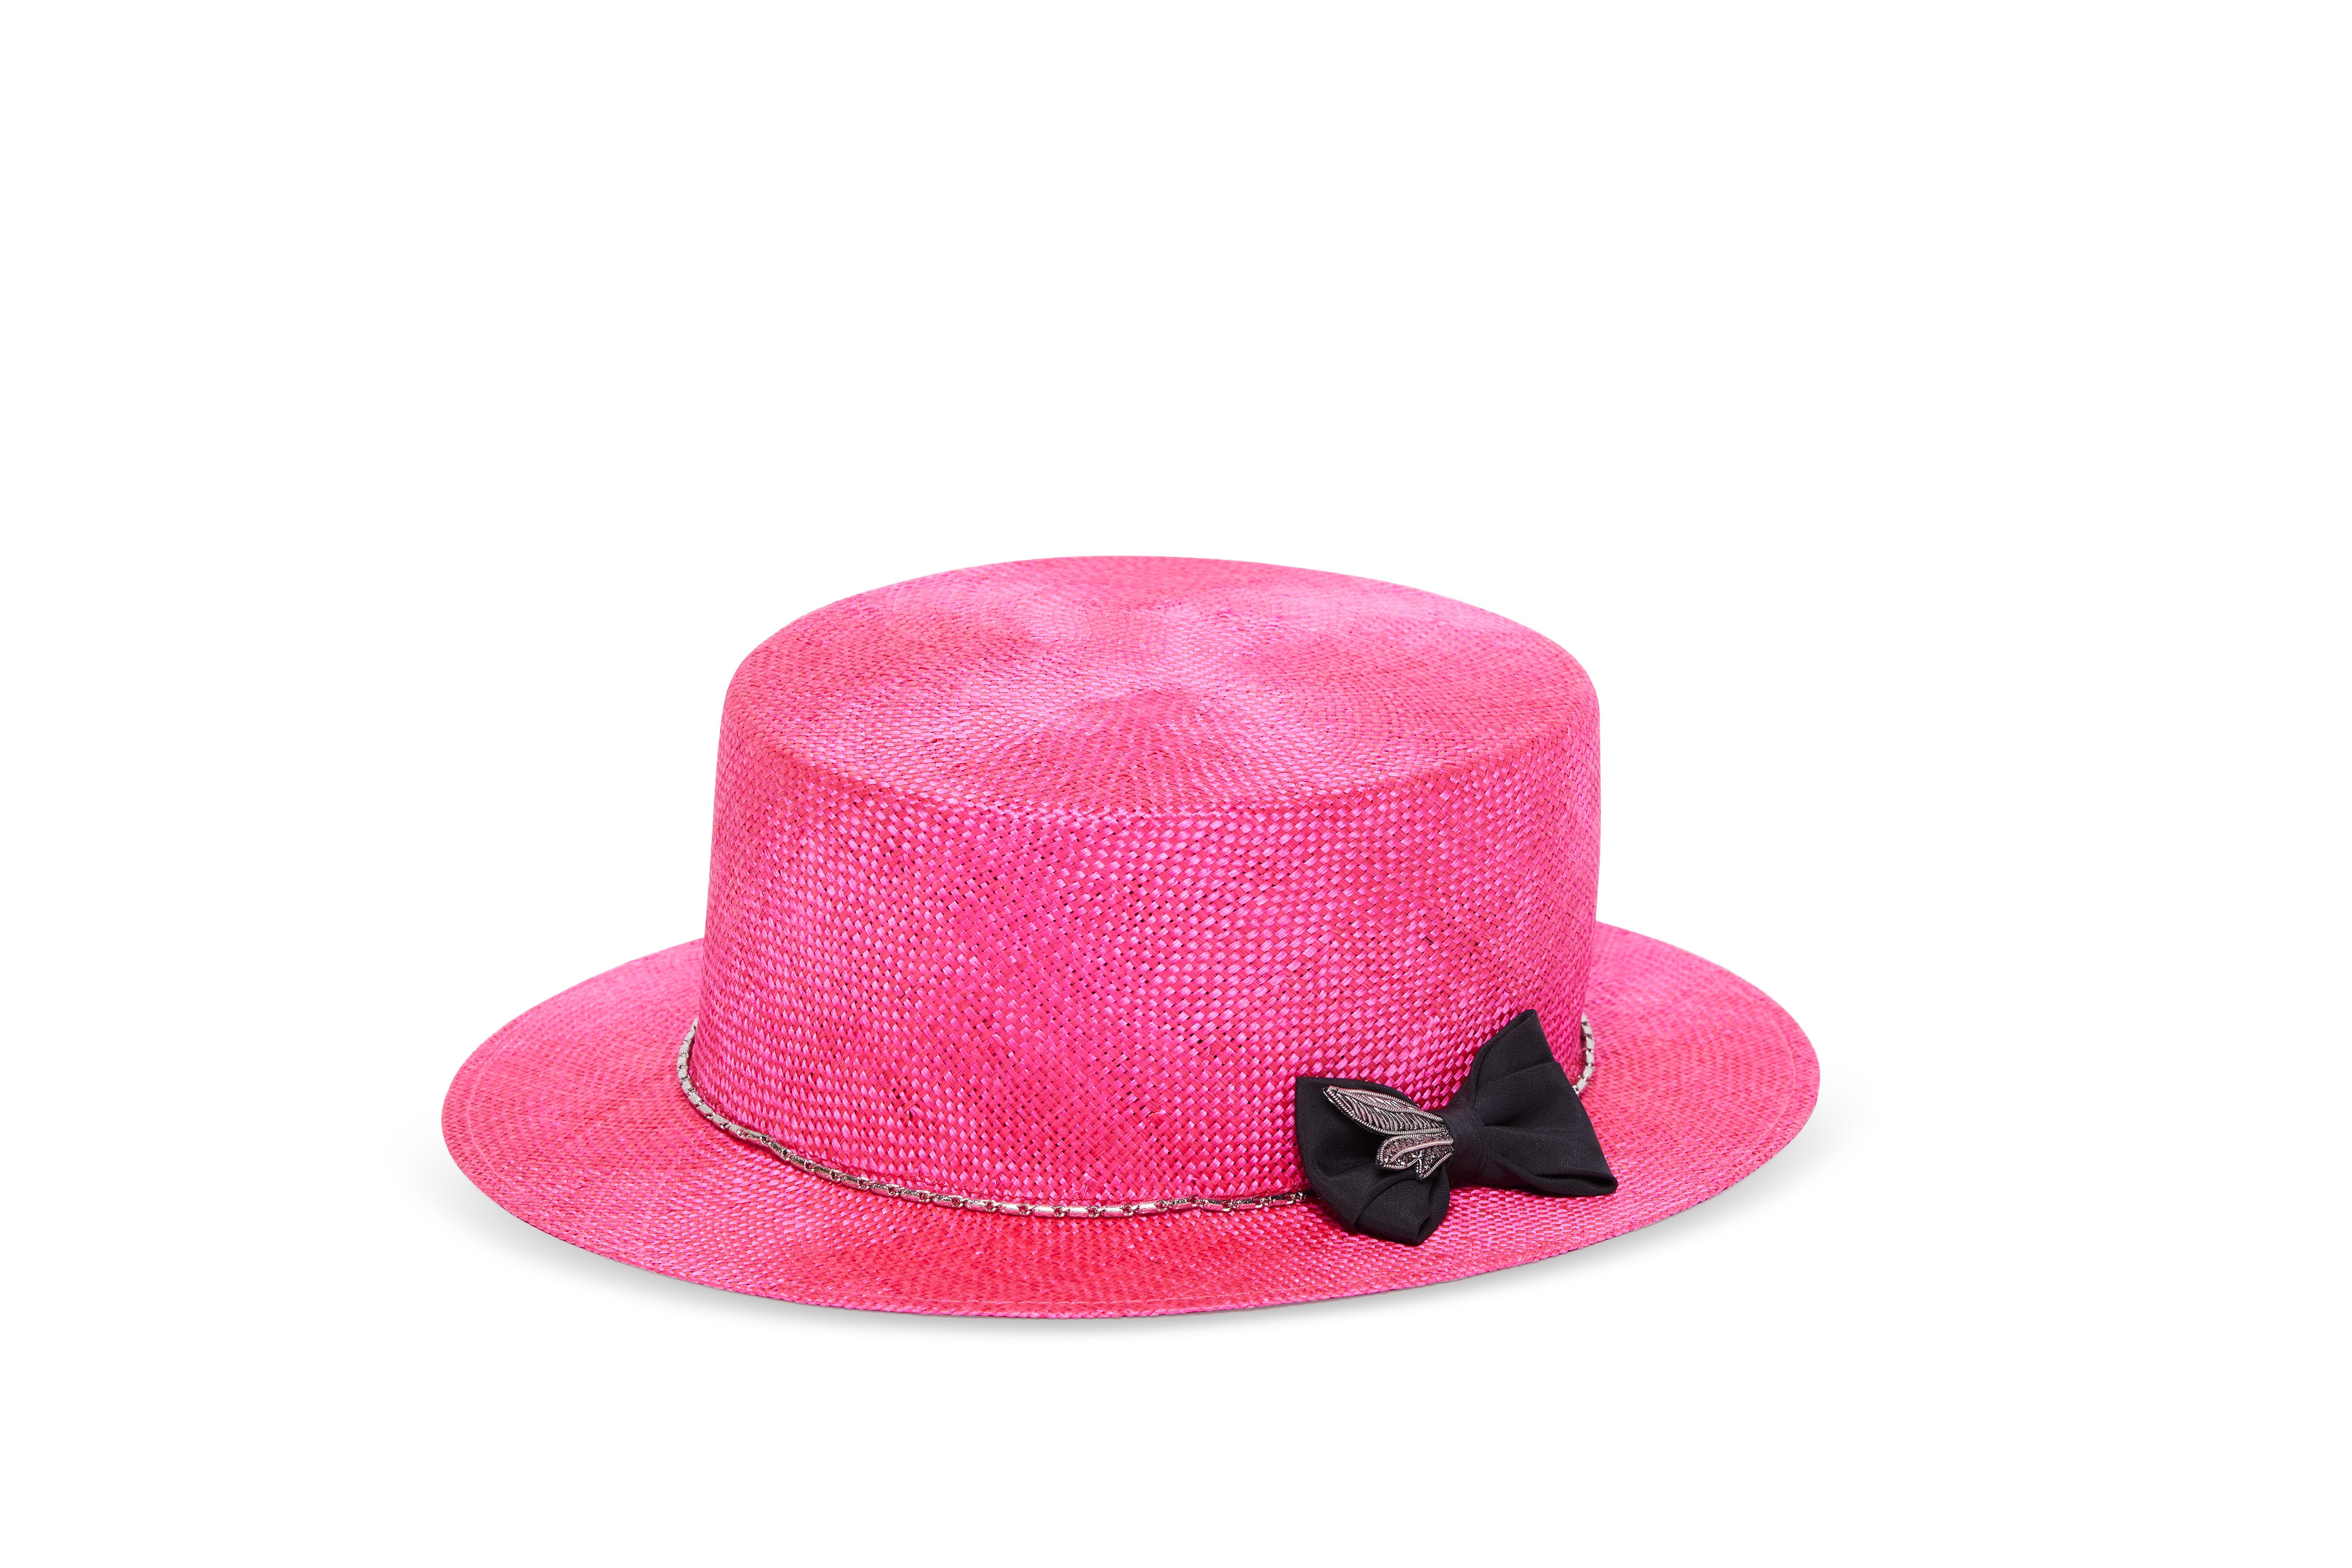 Fuchsia embellished hat NWOT
totally handmade in Italy 
FABRIC COLOR: Fuchsia



DECORATION: Metal spiral/feather veil